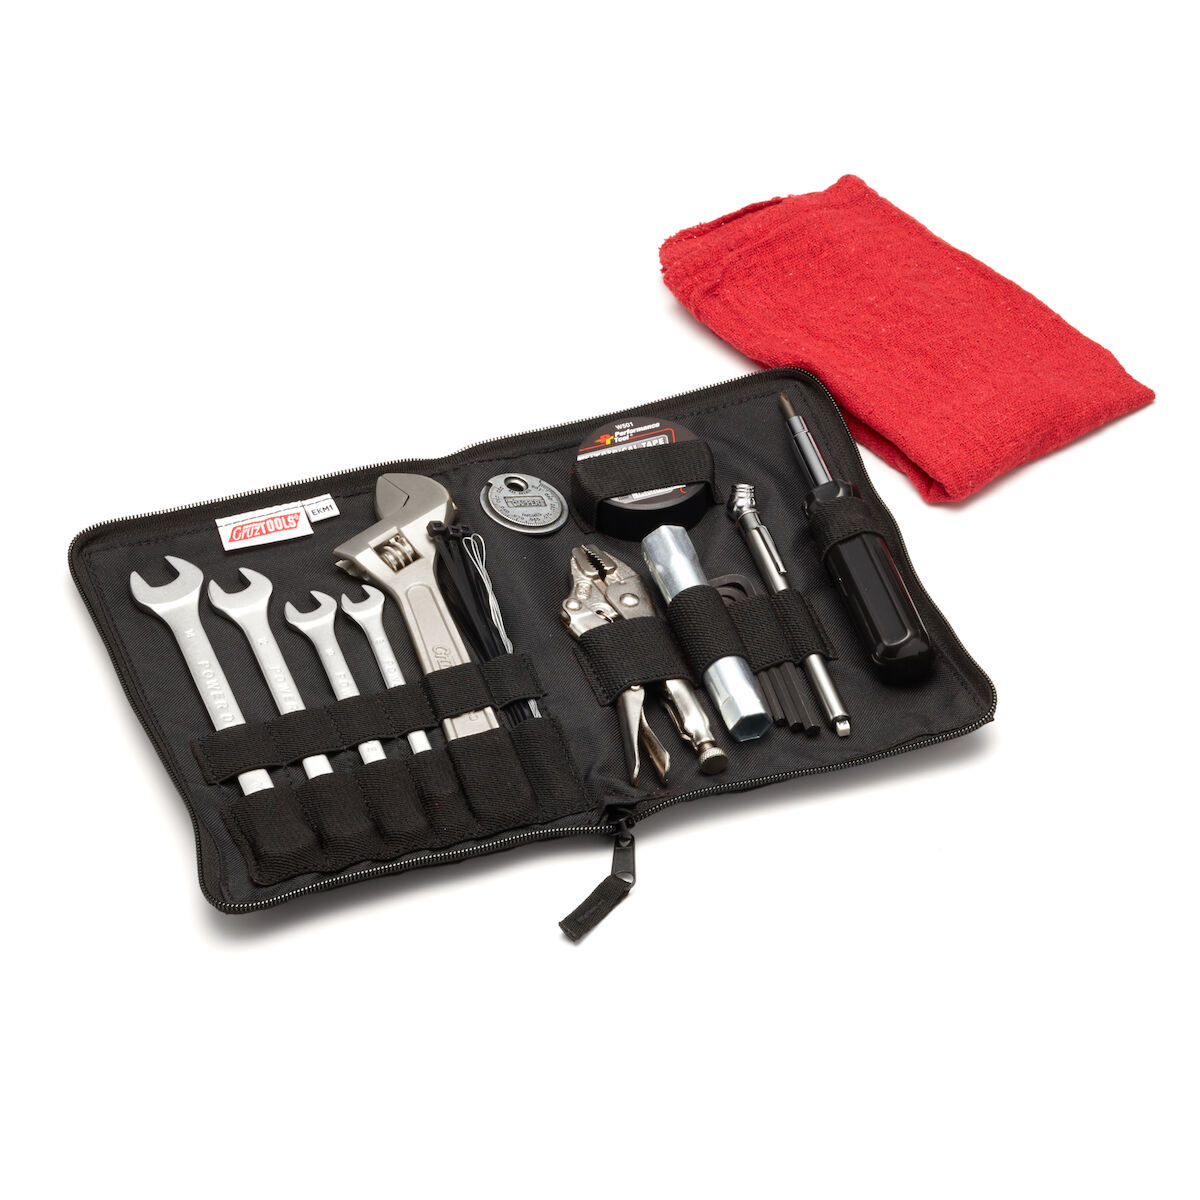 Comprehensive tool set that prepares you for just about anything the road will throw at you.